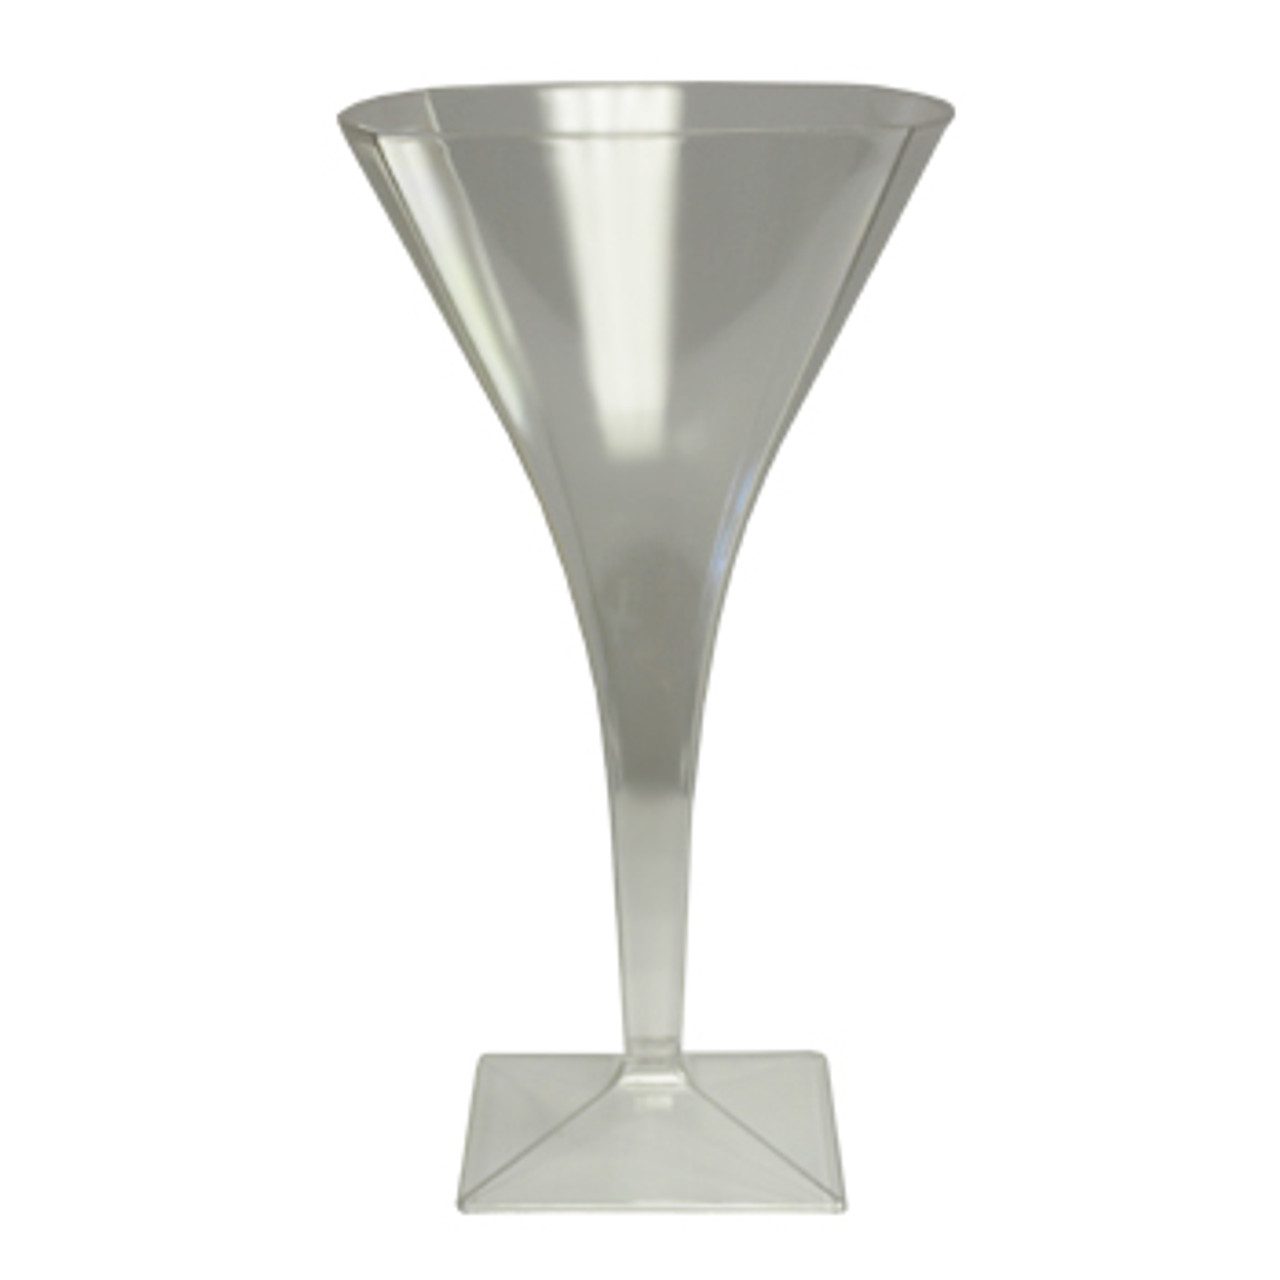 https://cdn11.bigcommerce.com/s-hgqmwywp99/images/stencil/1280x1280/products/49223/44014/8oz-clear-plastic-square-tall-martini-glasses-maryland-plastic-6pk-15__75987.1675880312.jpg?c=1?imbypass=on